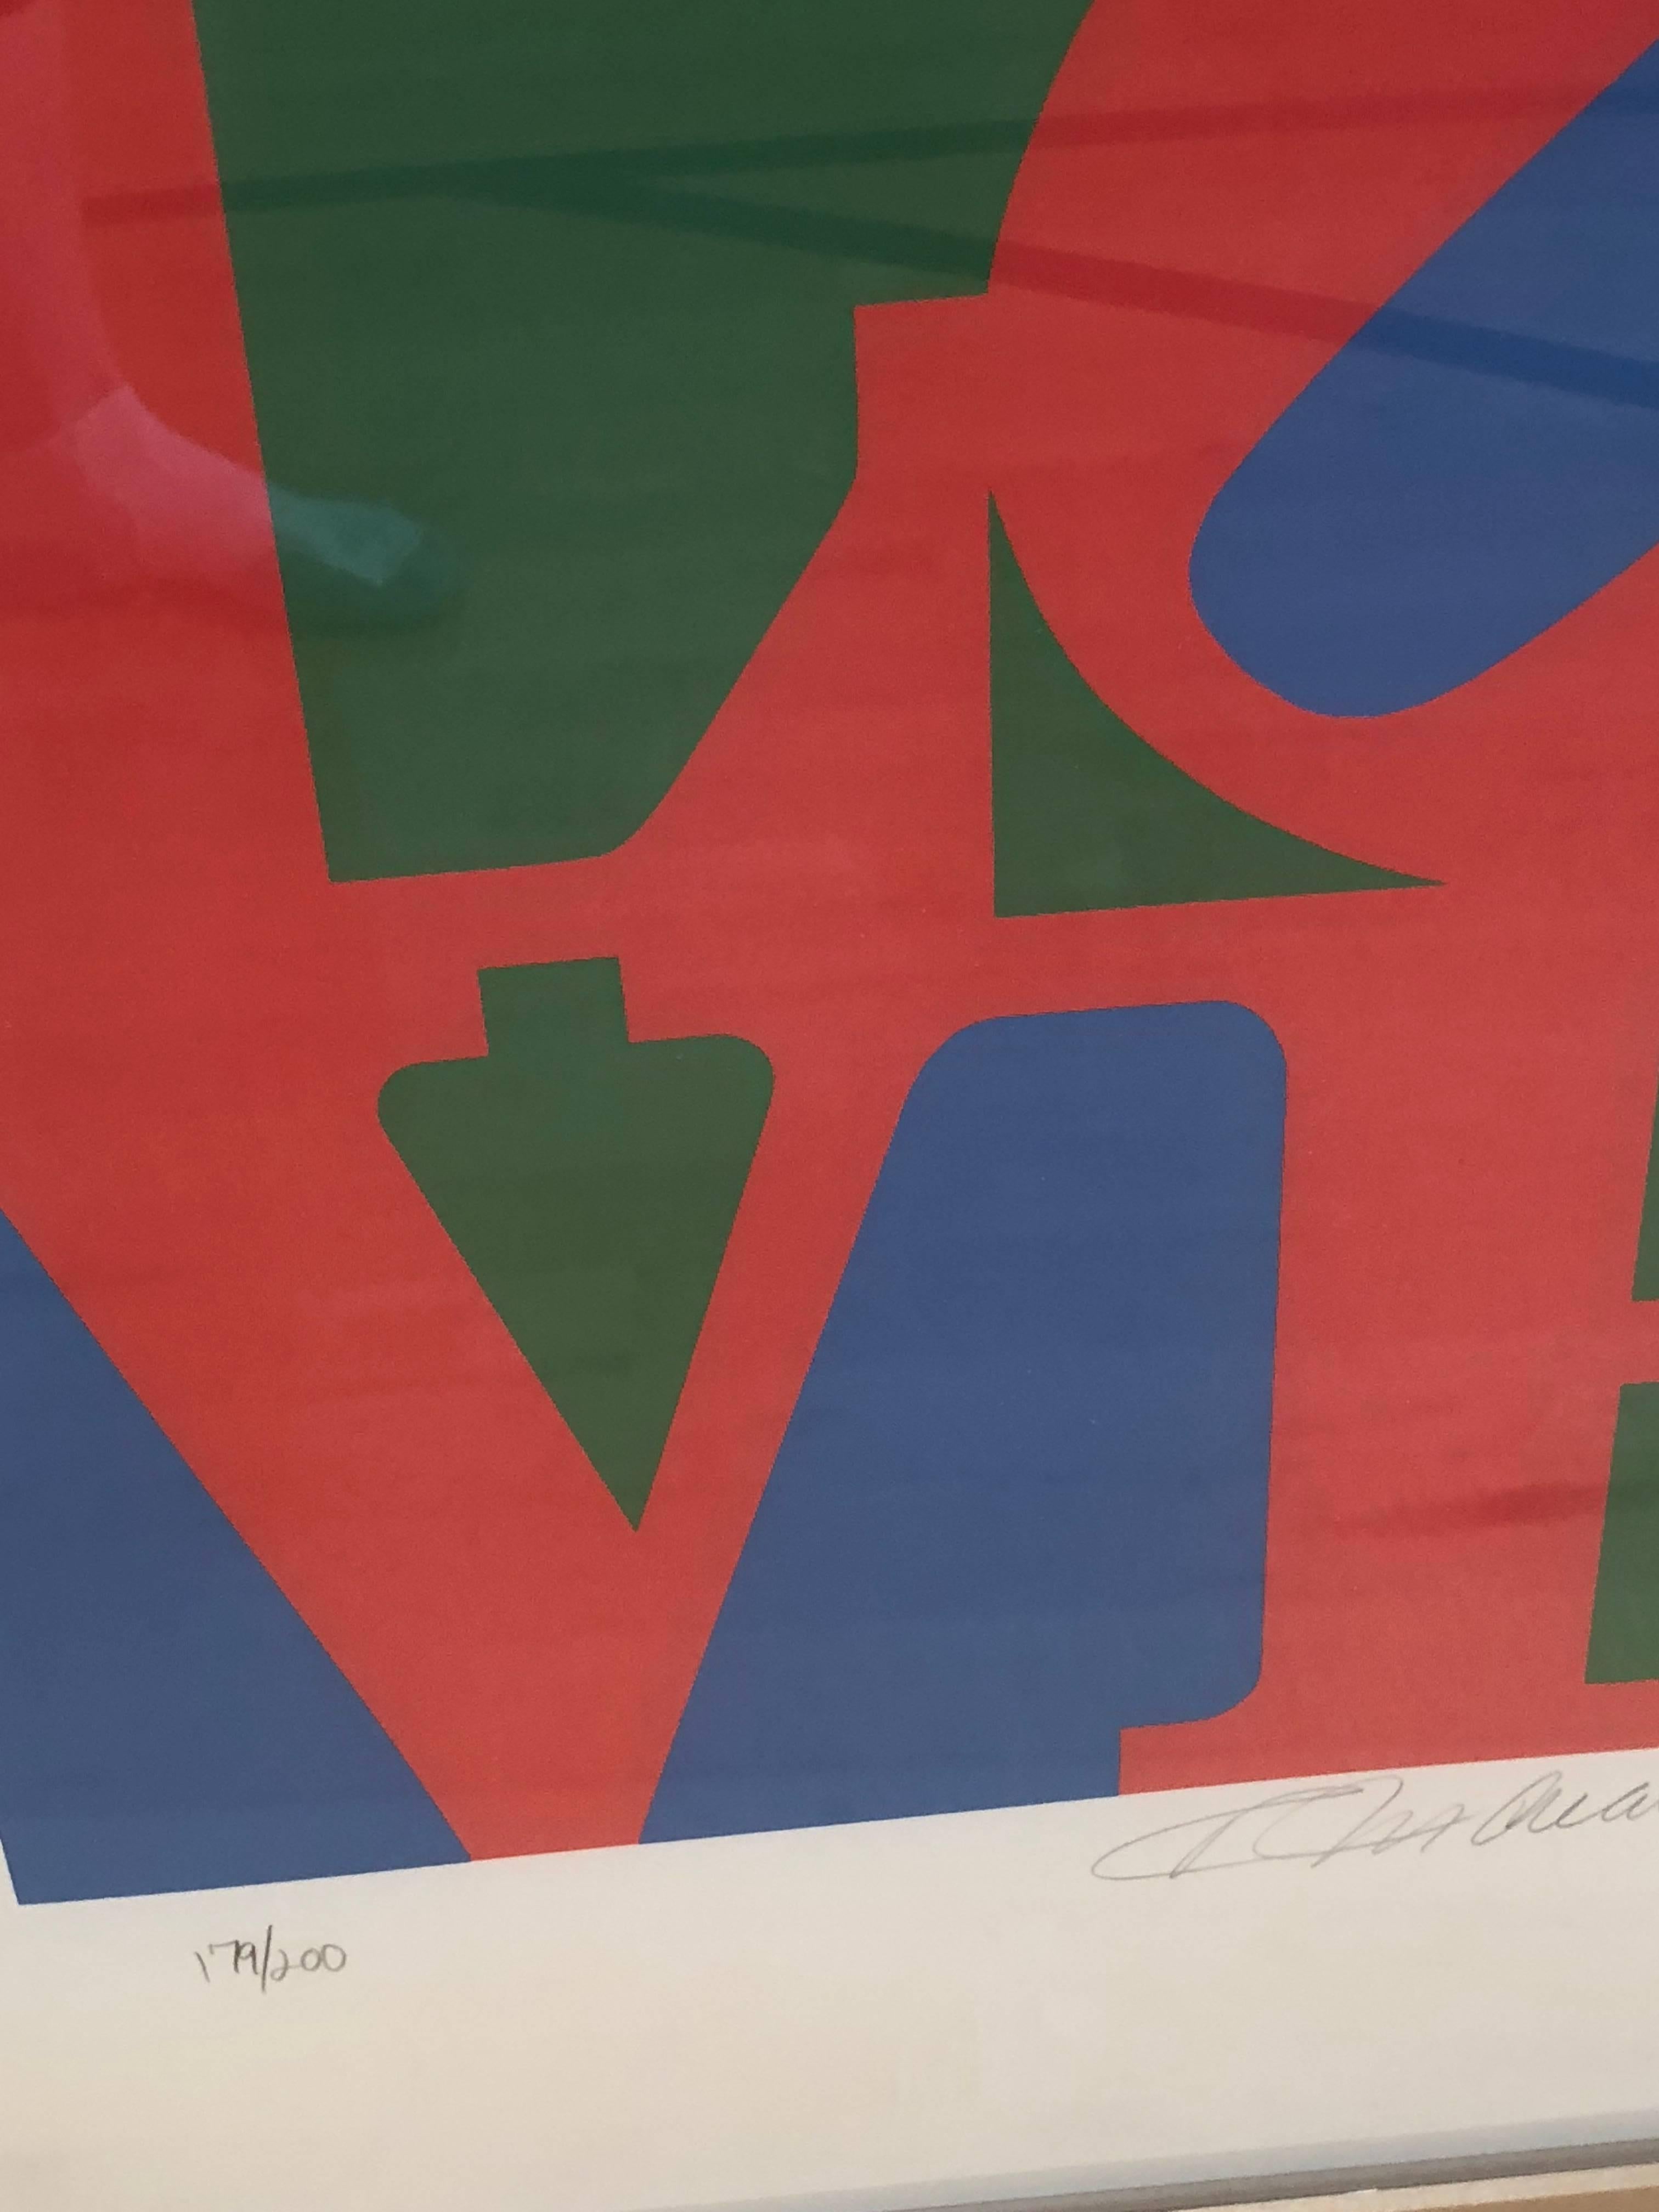 American 20th Century Pop Art Signed and Numbered Robert Indiana, LOVE, 1996